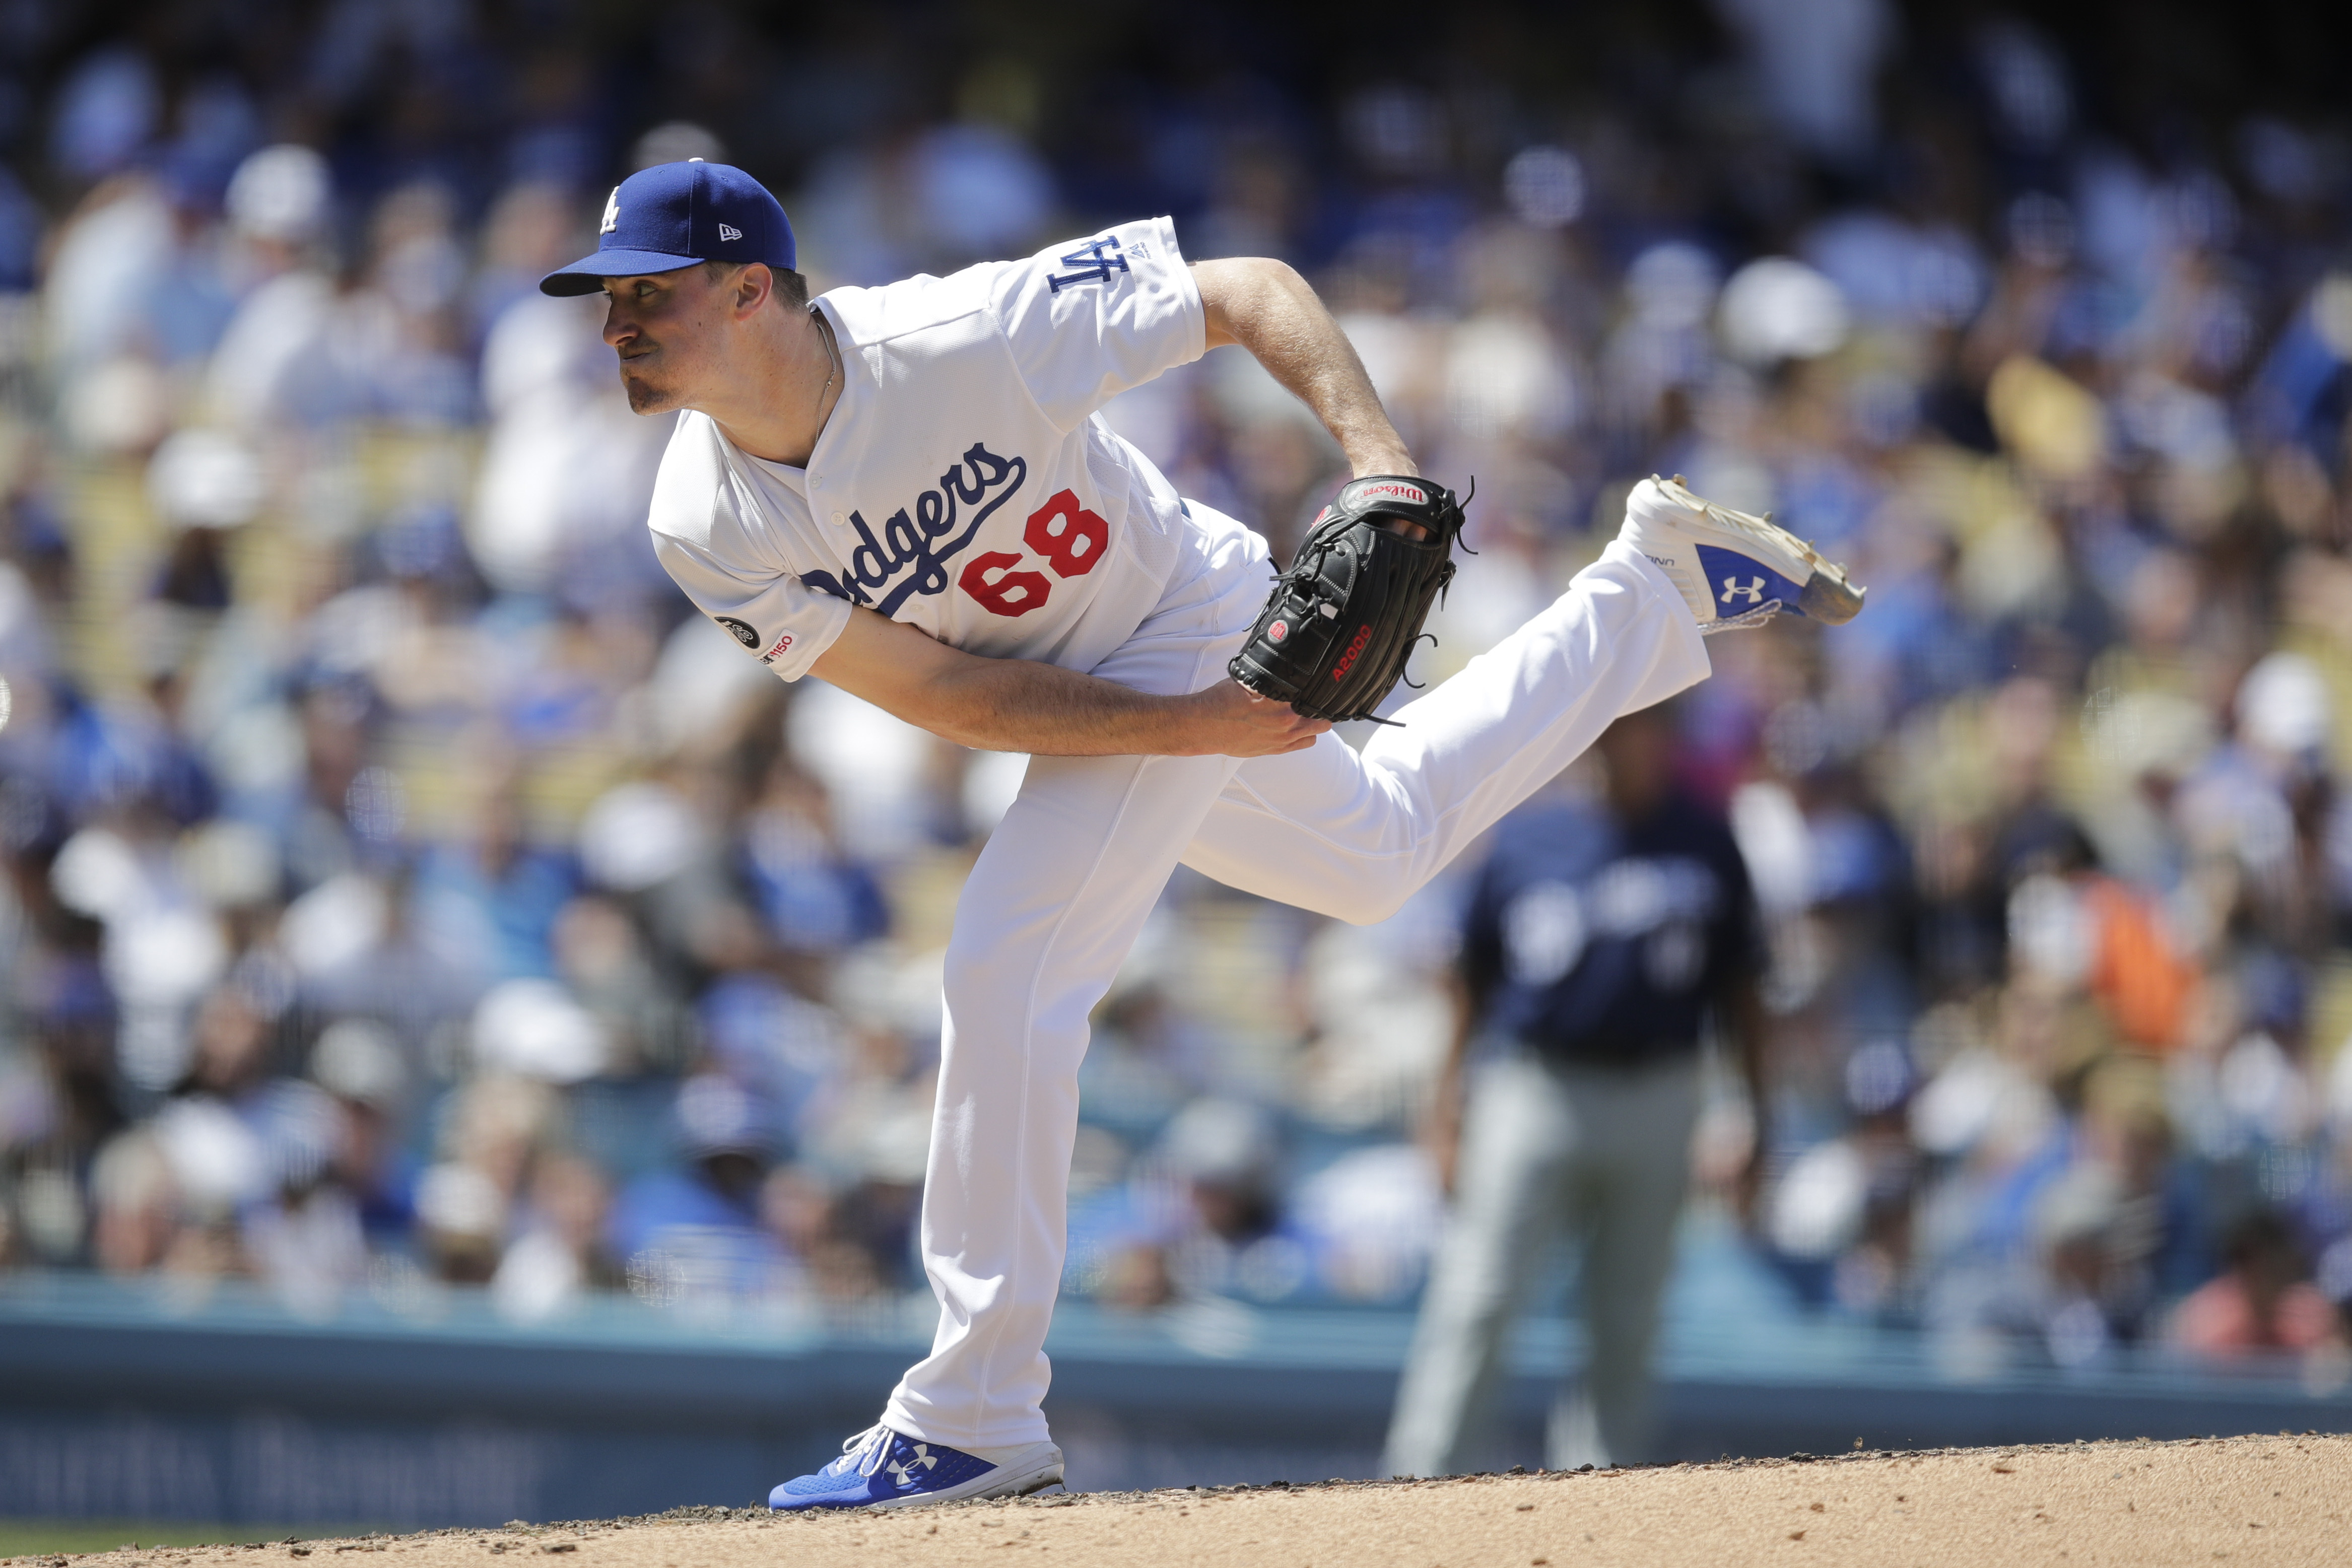 Stripling, Dodgers end 6-game skid with 7-1 win over Brewers